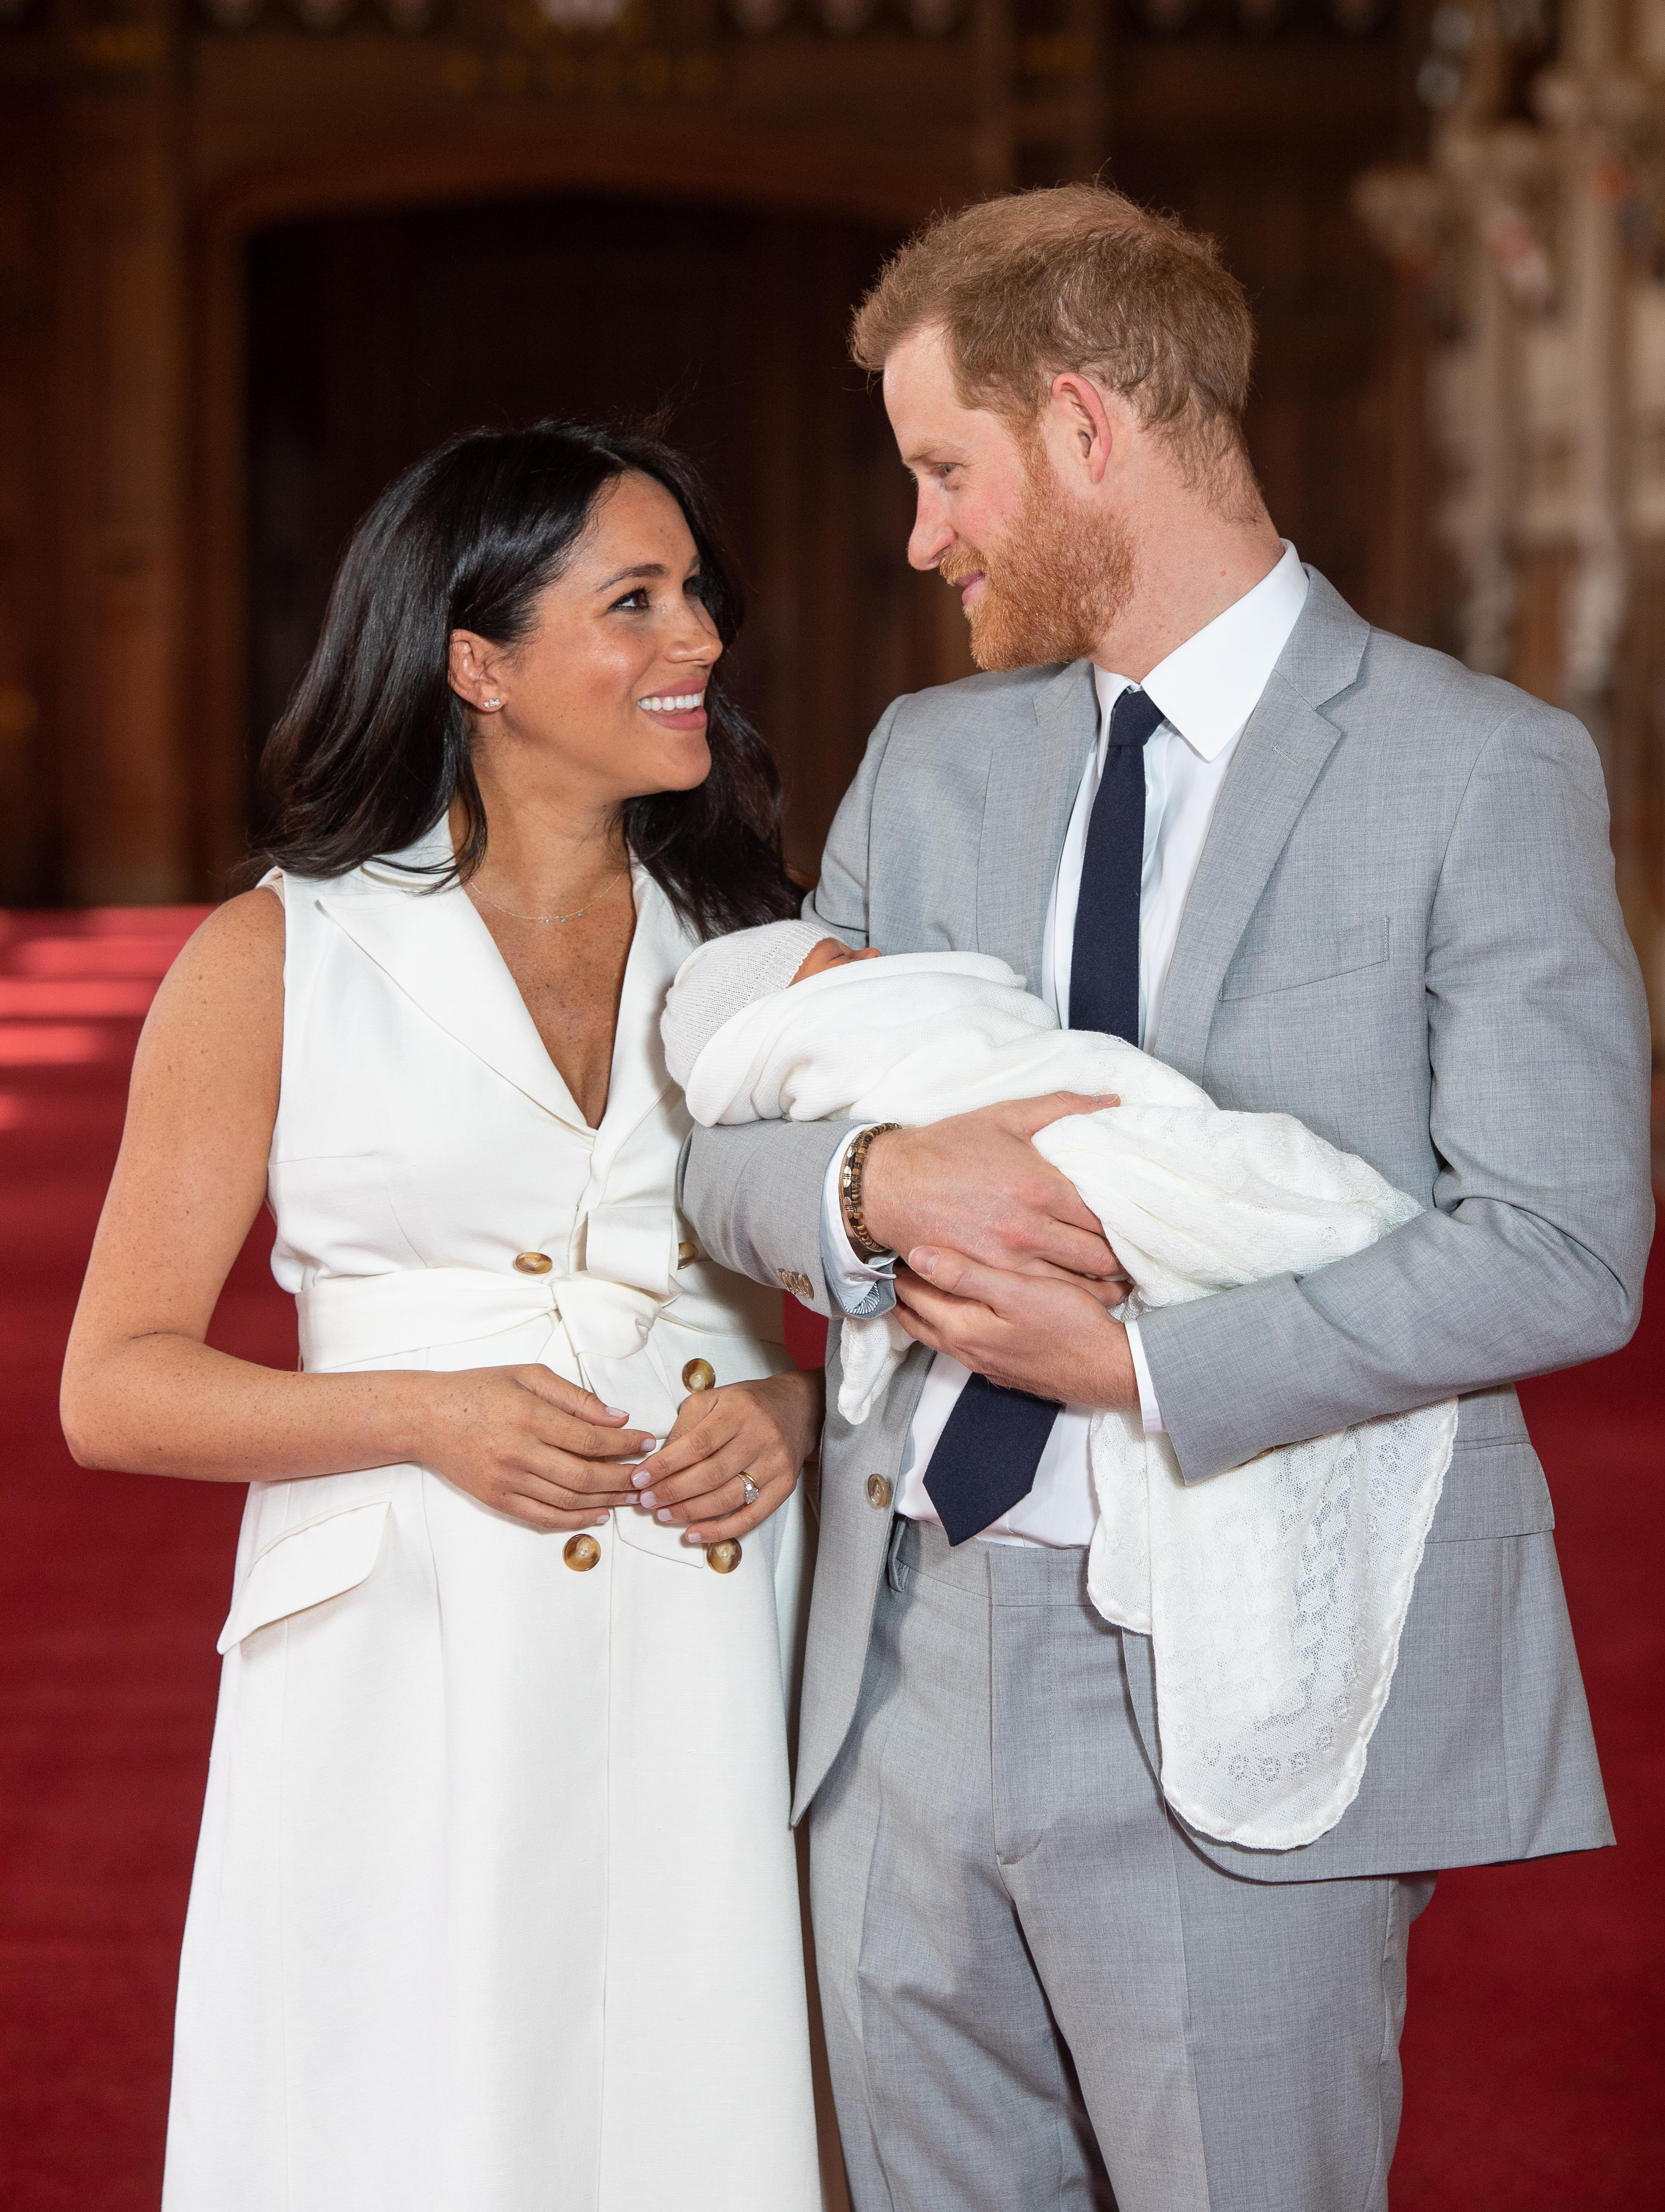 Prince Harry and Meghan Markle pose with newborn Archie  during a photocall in St George's Hall at Windsor Castle on May 8, 2019 in Windsor, England | Source: Getty Images